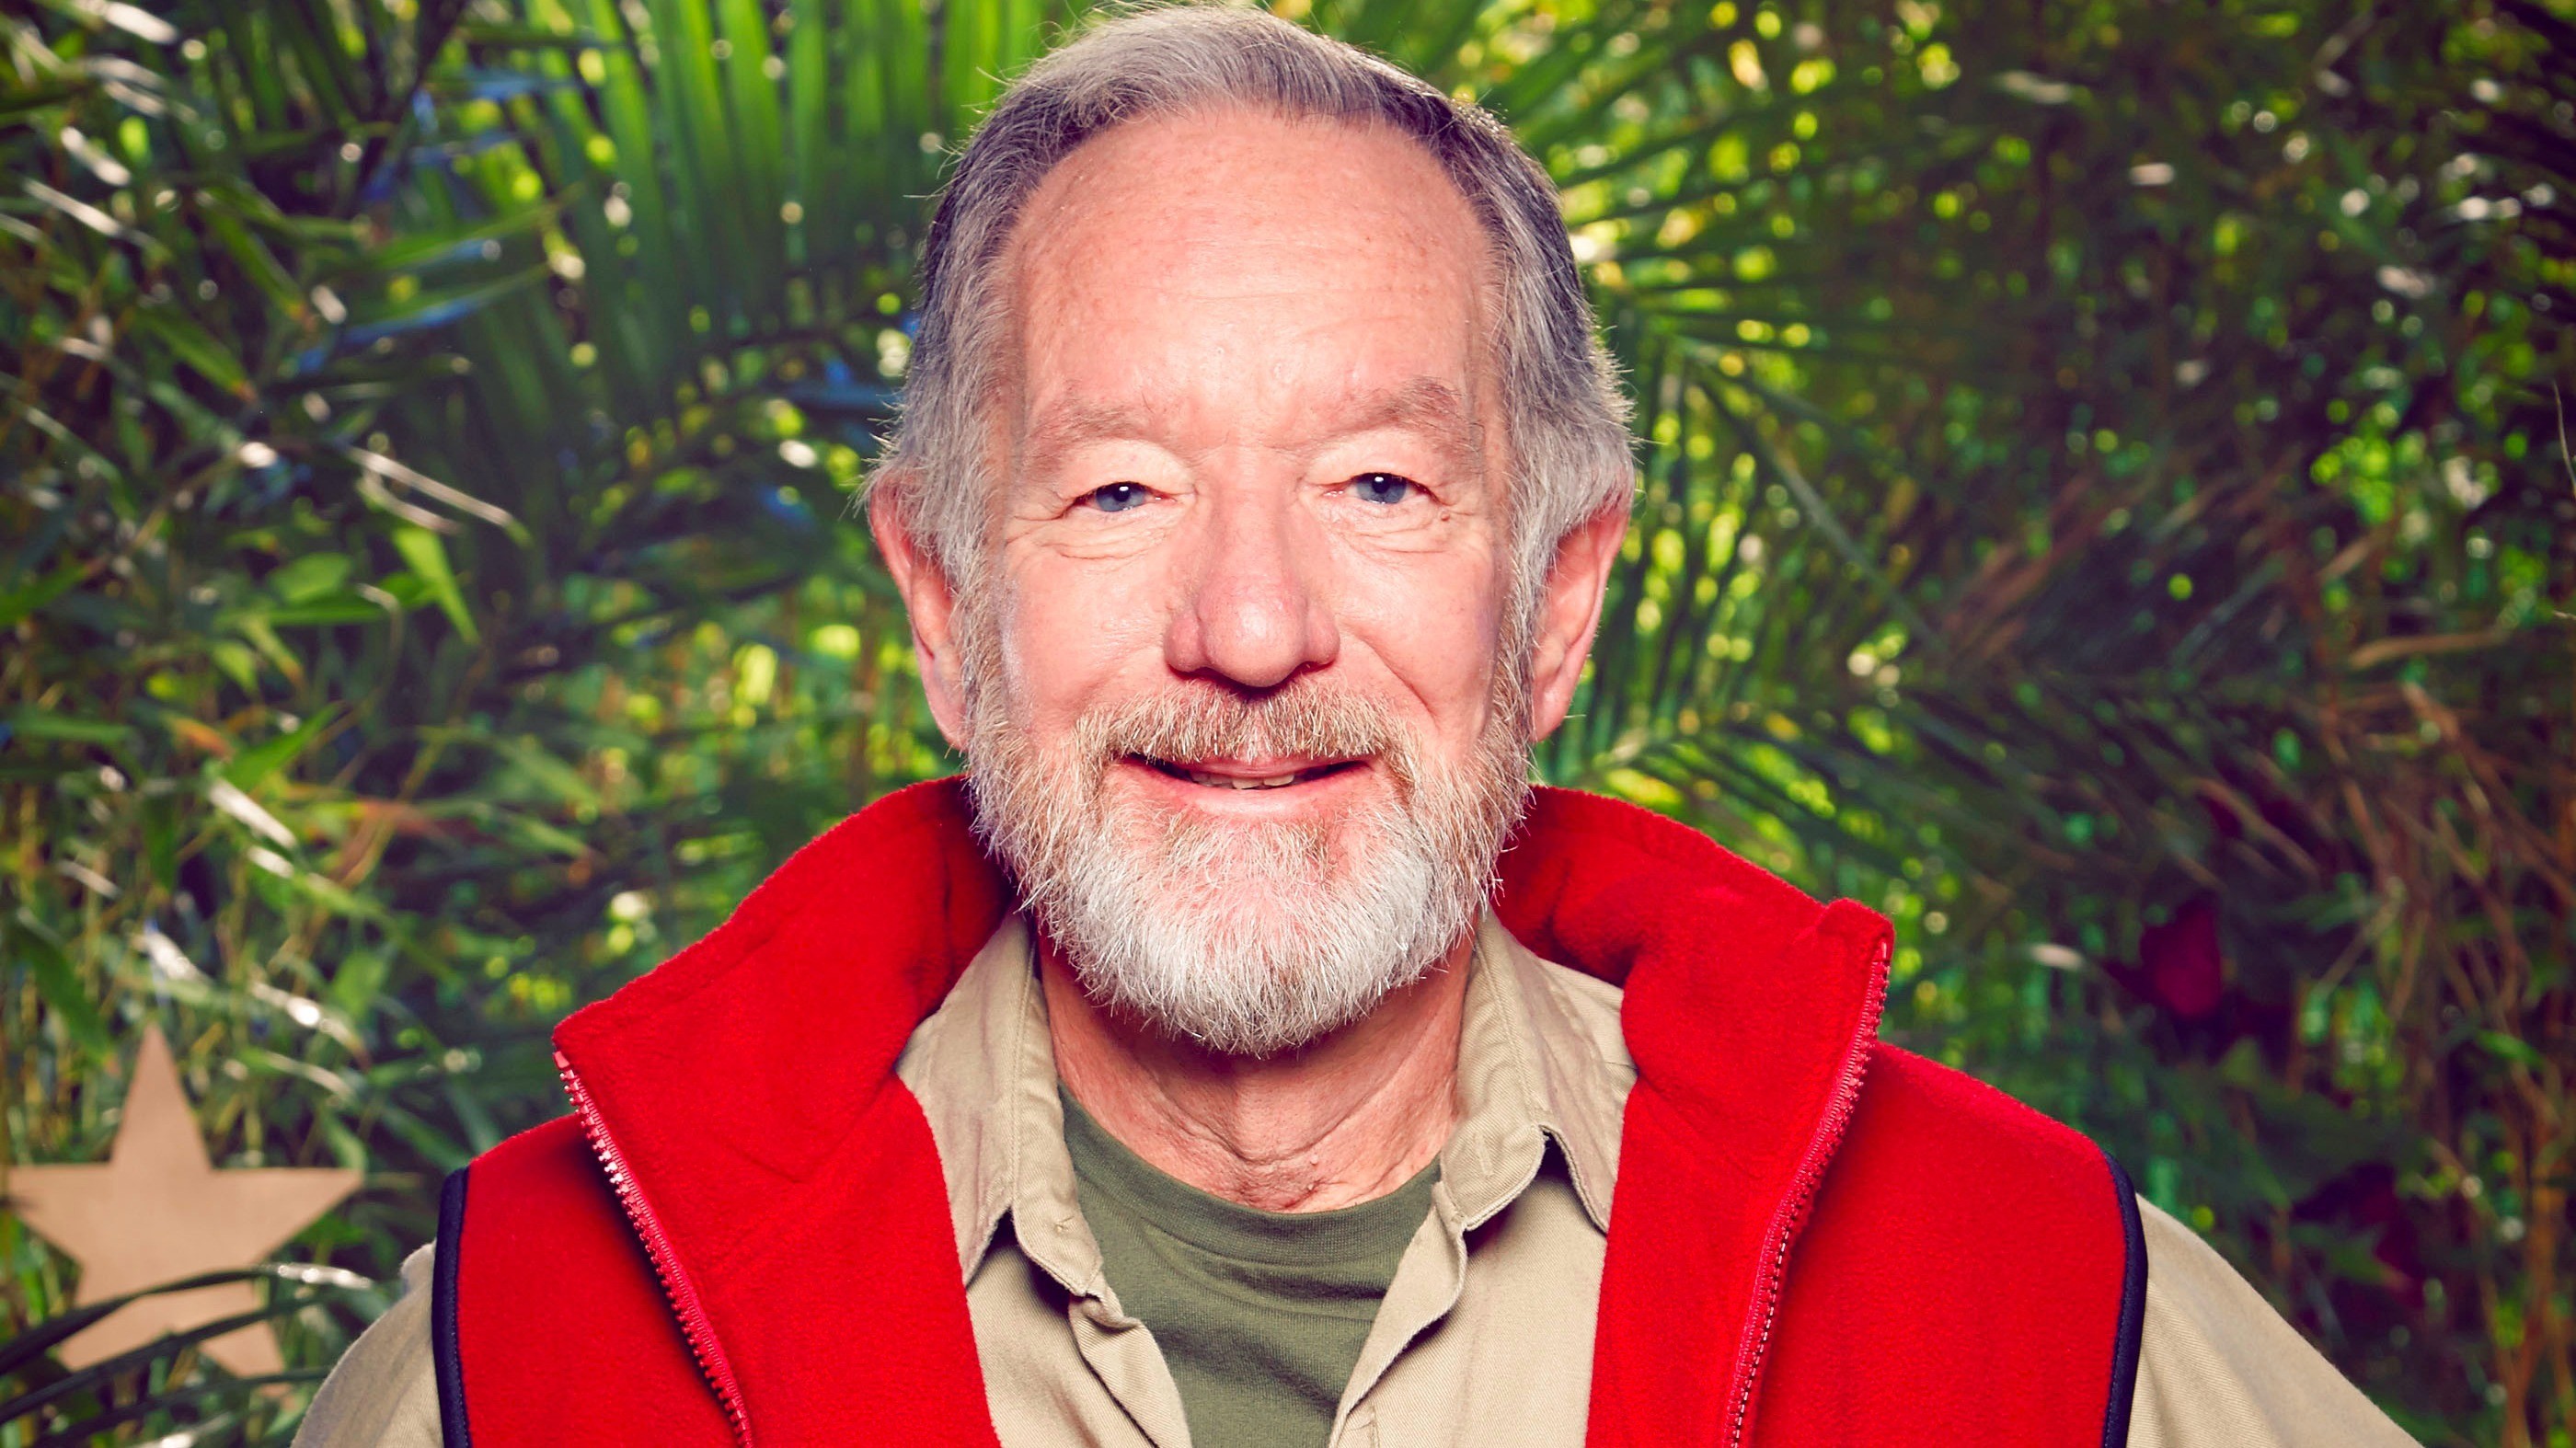 Michael Buerk  I'm A Celebrity Get Me Out Of Here